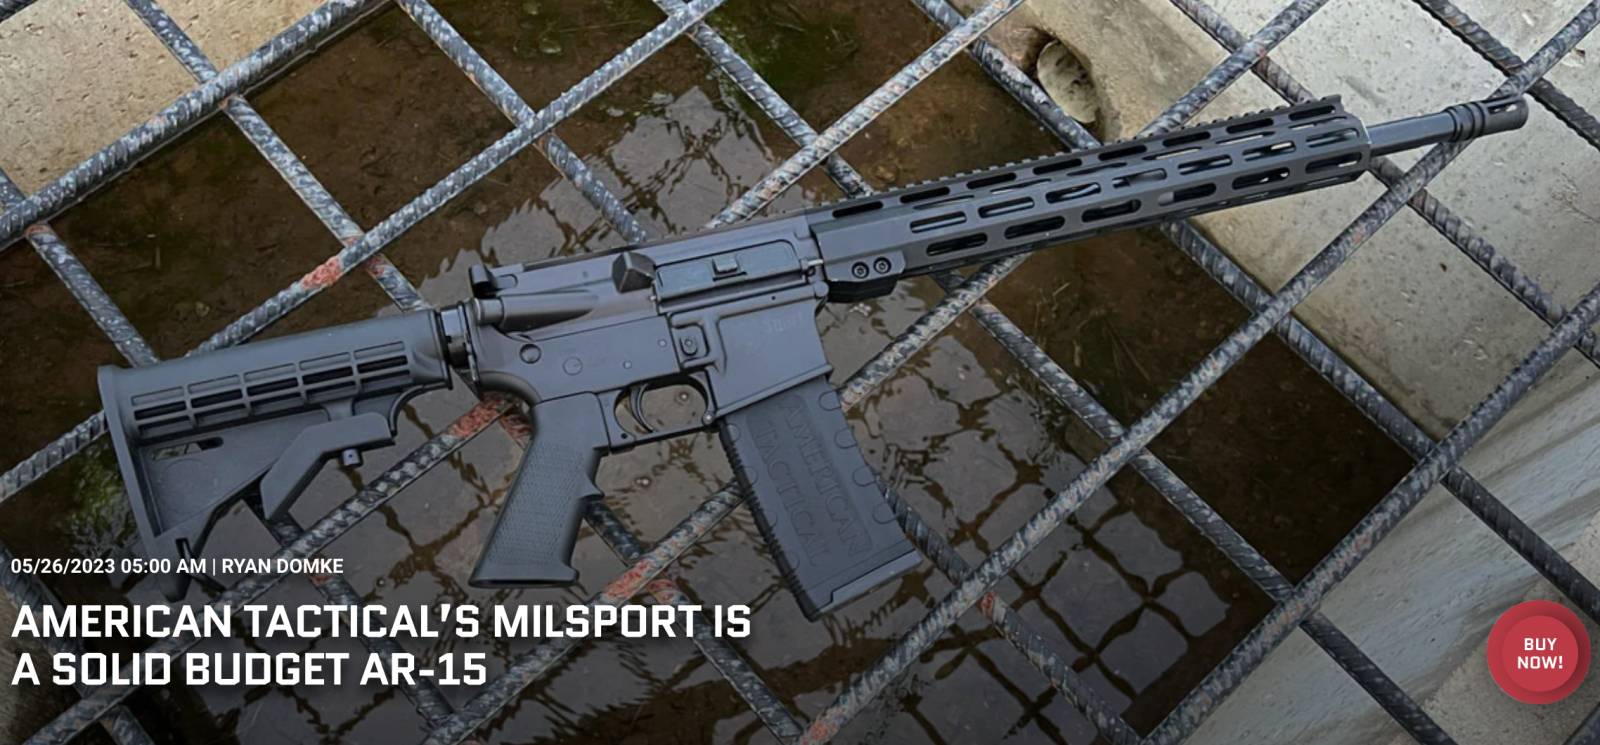 AMERICAN TACTICAL’S MILSPORT IS A SOLID BUDGET AR-15